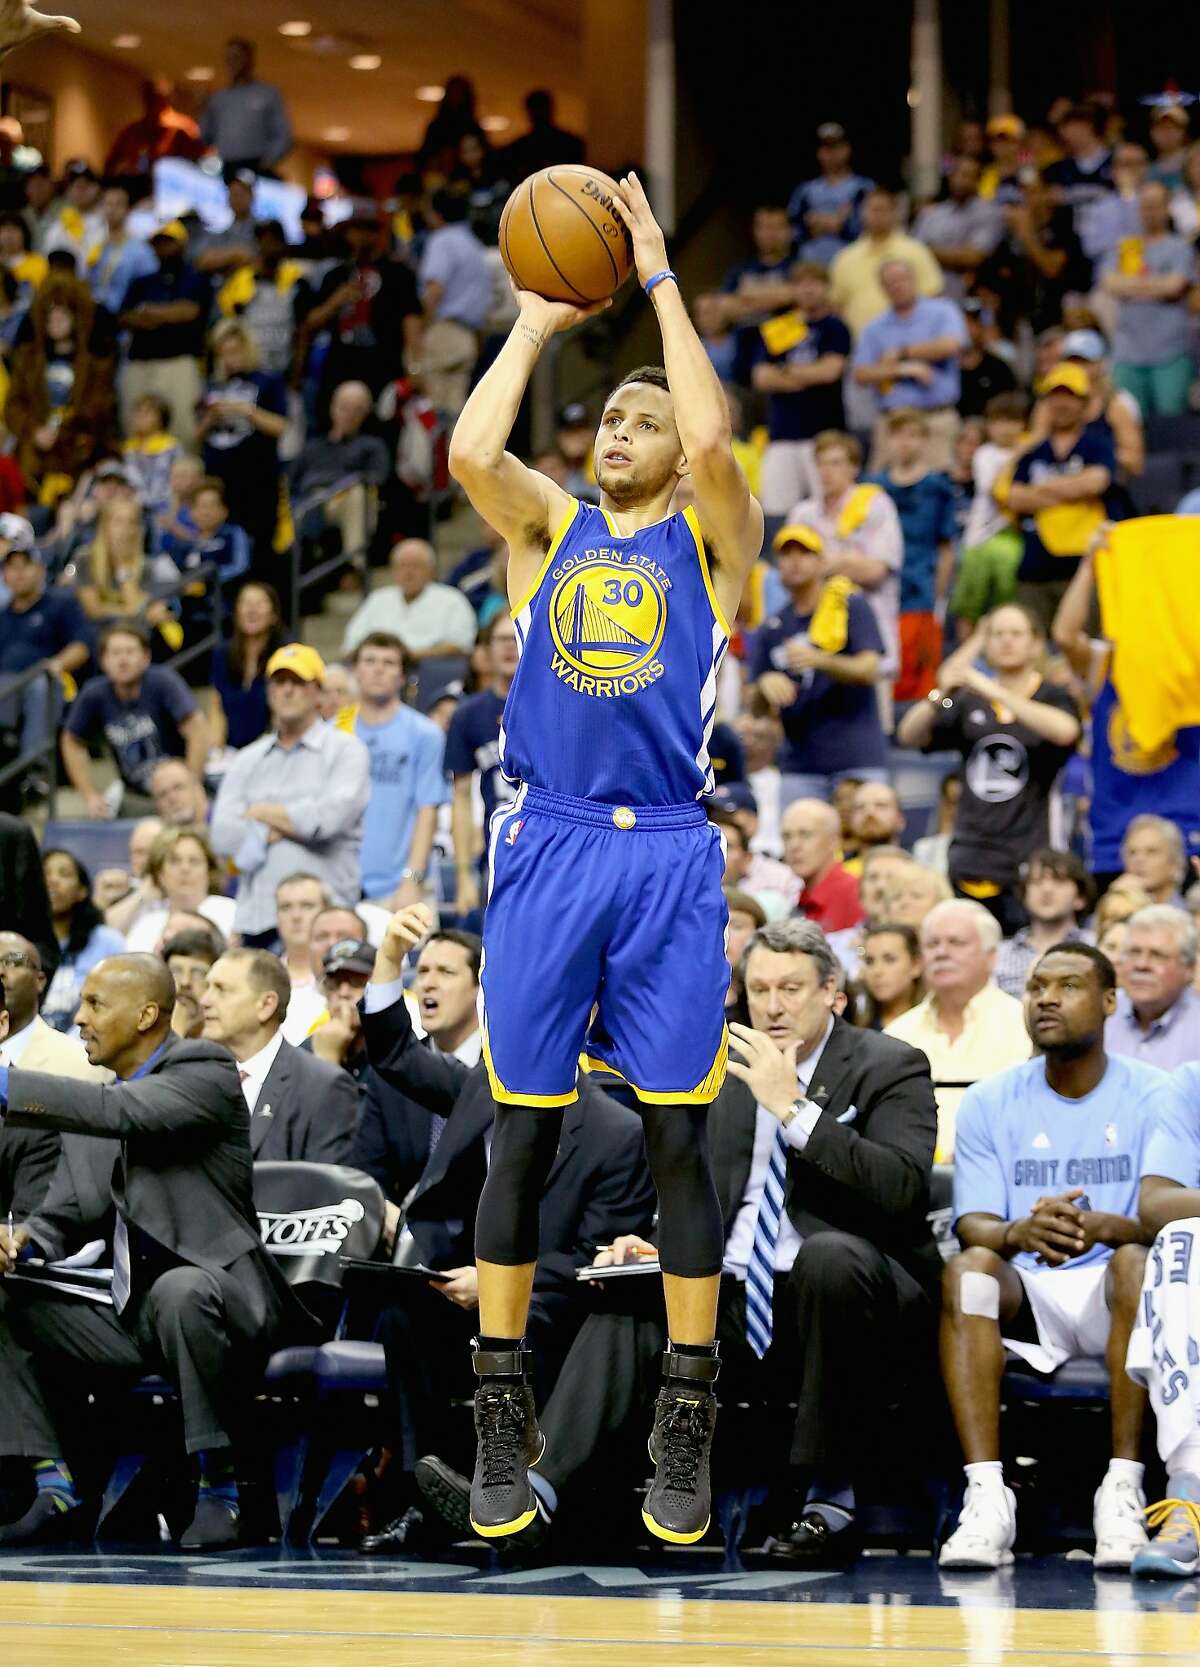 MEMPHIS, TN - MAY 15: Stephen Curry #30 of the Golden State Warriors shoots the ball against the Memphis Grizzlies during Game six of the Western Conference Semifinals of the 2015 NBA Playoffs at FedExForum on May 15, 2015 in Memphis, Tennessee. NOTE TO USER: User expressly acknowledges and agrees that, by downloading and or using this photograph, User is consenting to the terms and conditions of the Getty Images License Agreement (Photo by Andy Lyons/Getty Images)